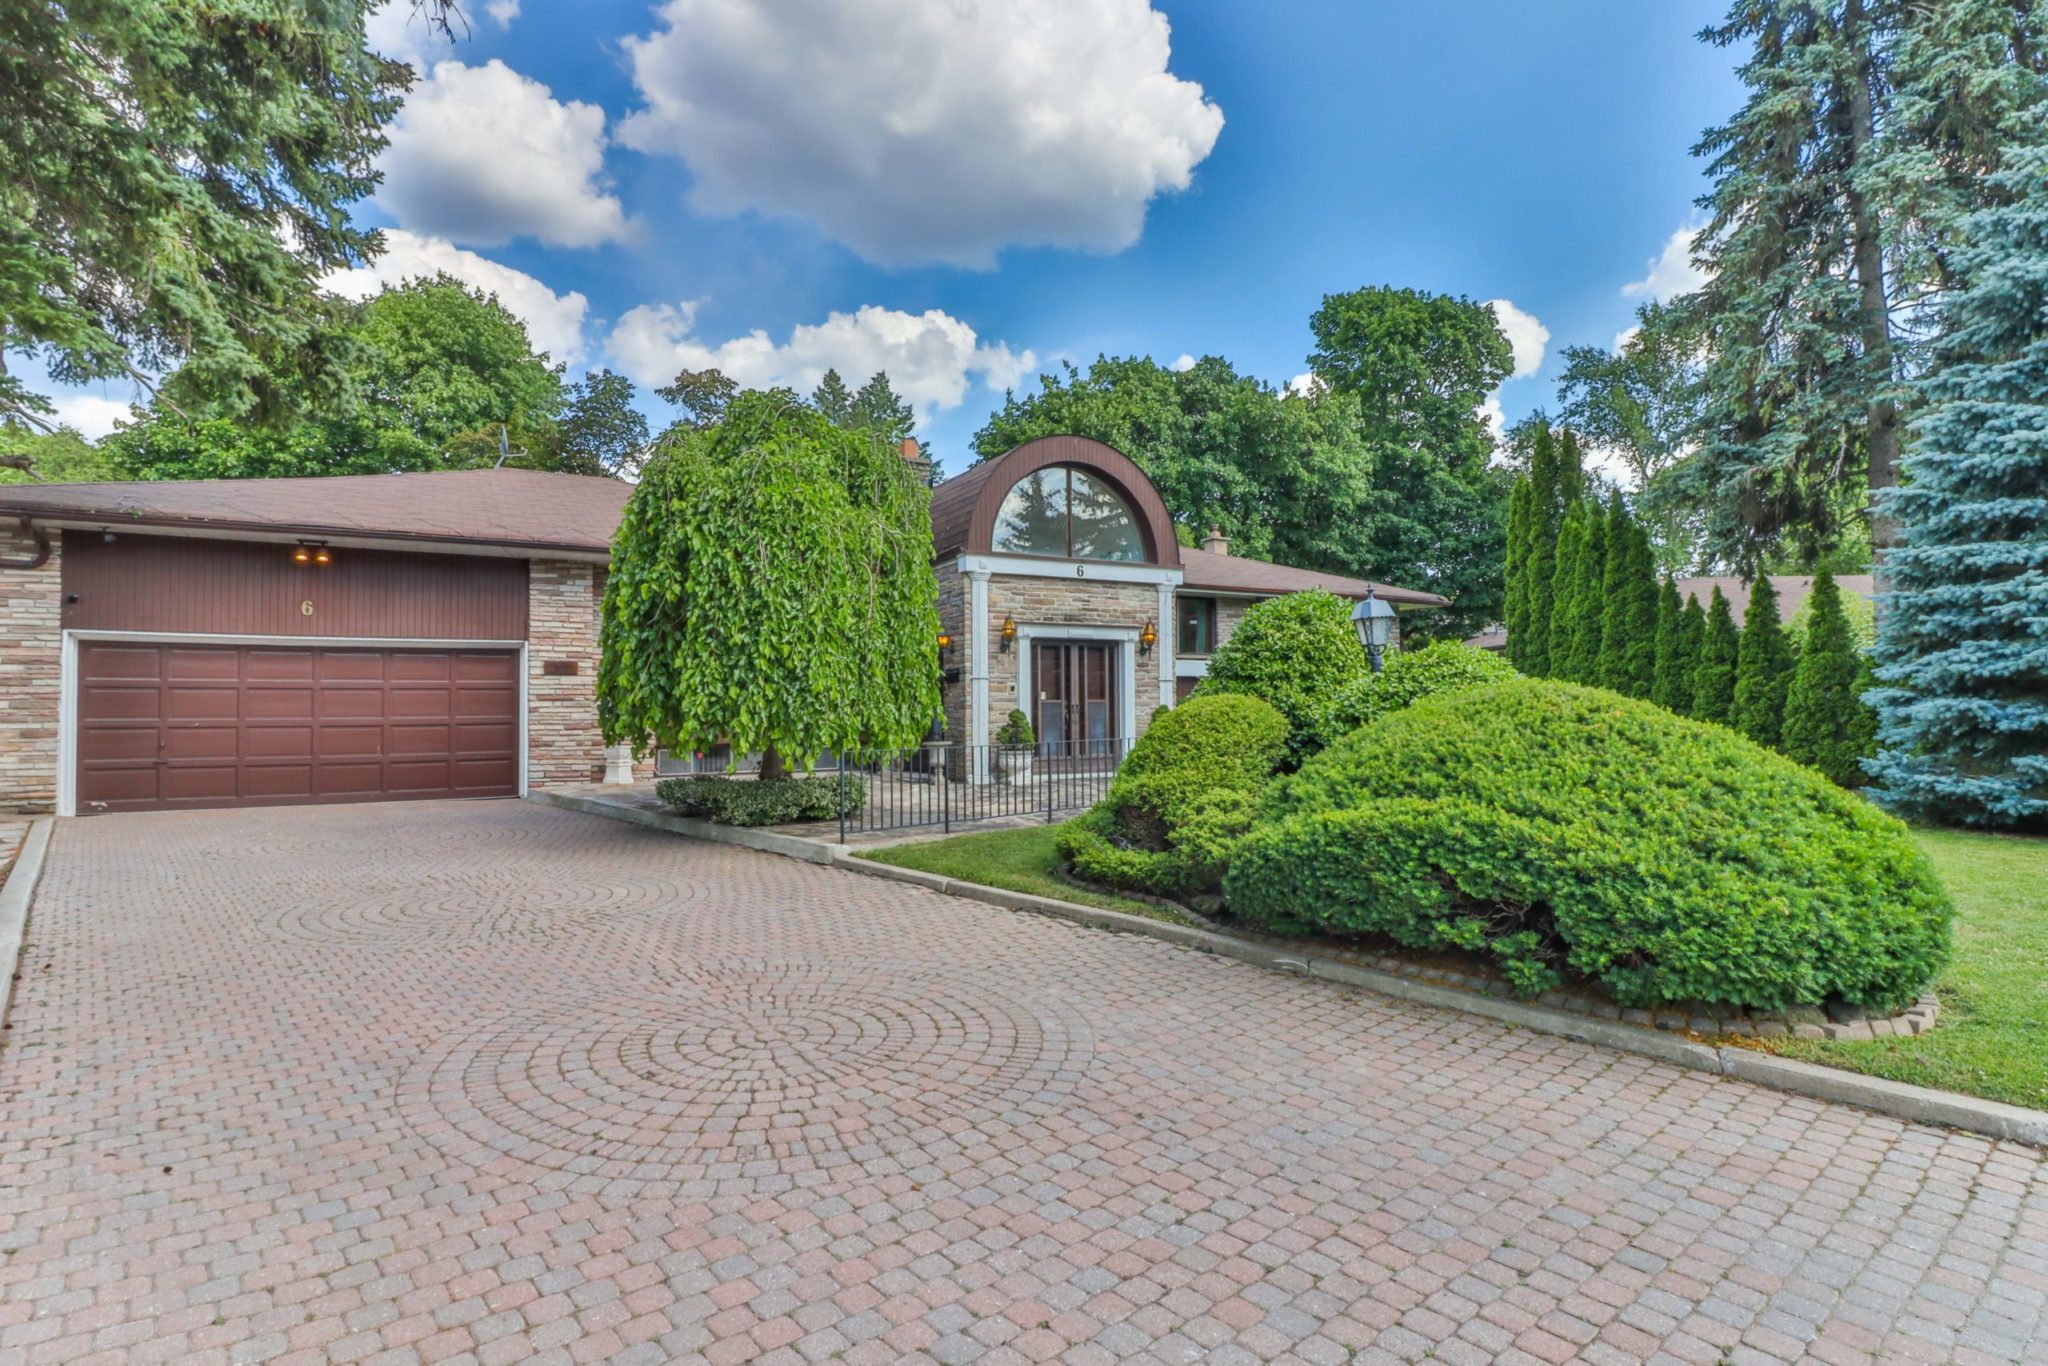 Large bungalow with 6-car driveway and huge front yard with trees.